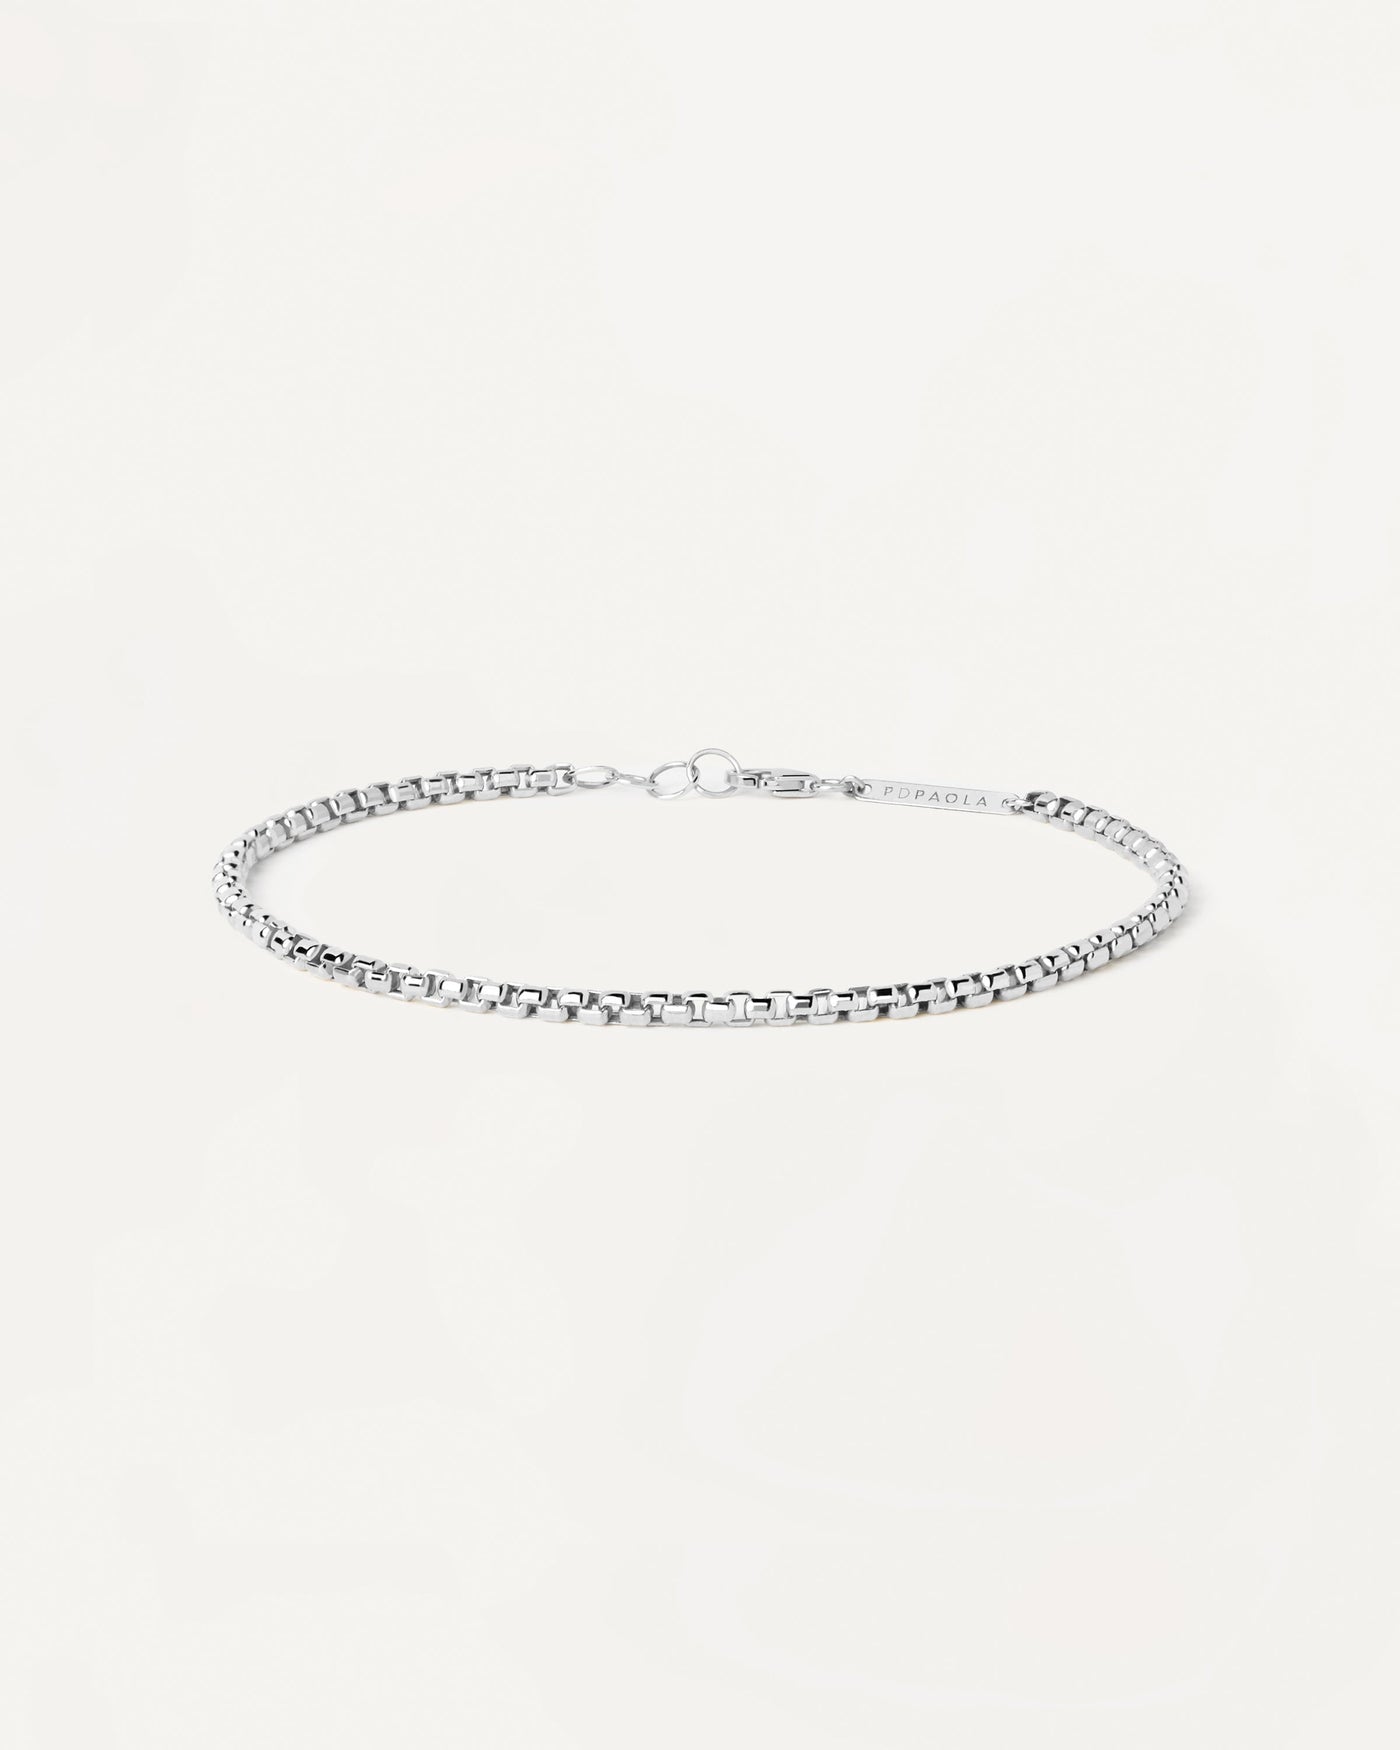 2023 Selection | White Gold Box Chain Bracelet. 18K solid white gold chain bracelet with box links. Get the latest arrival from PDPAOLA. Place your order safely and get this Best Seller. Free Shipping.